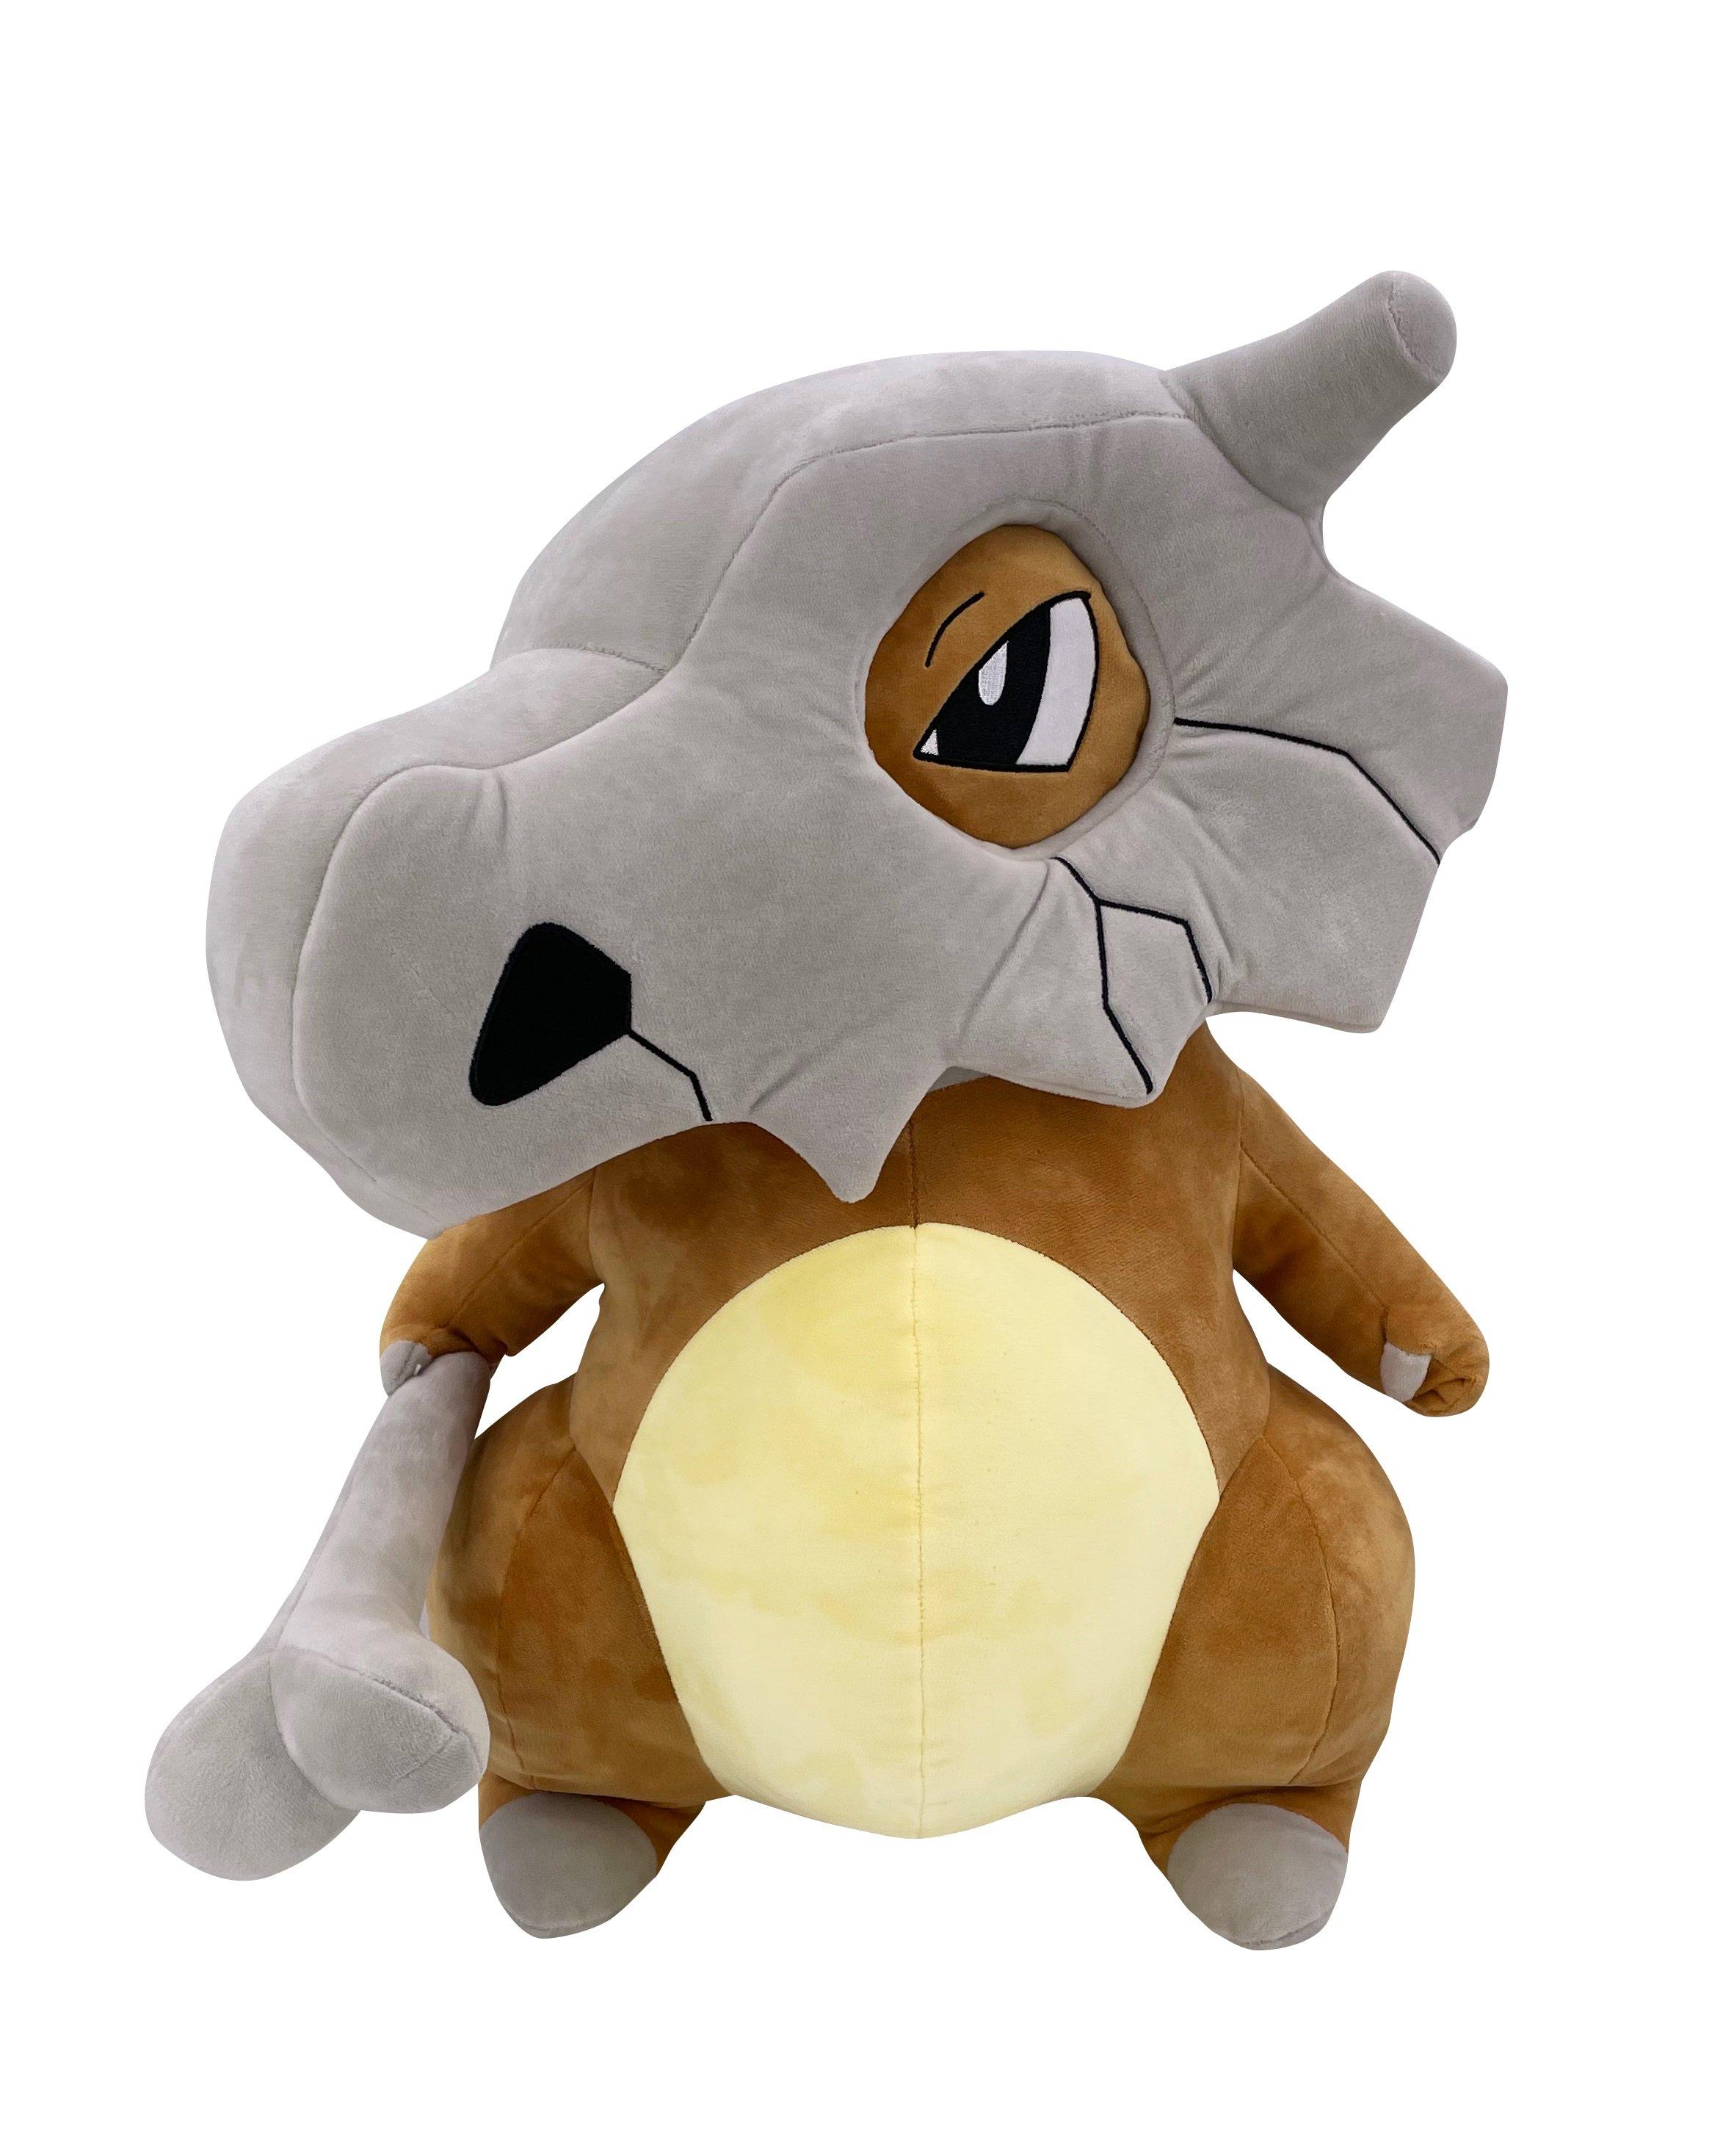  Pokémon 12 Large Eevee Plush - Officially Licensed